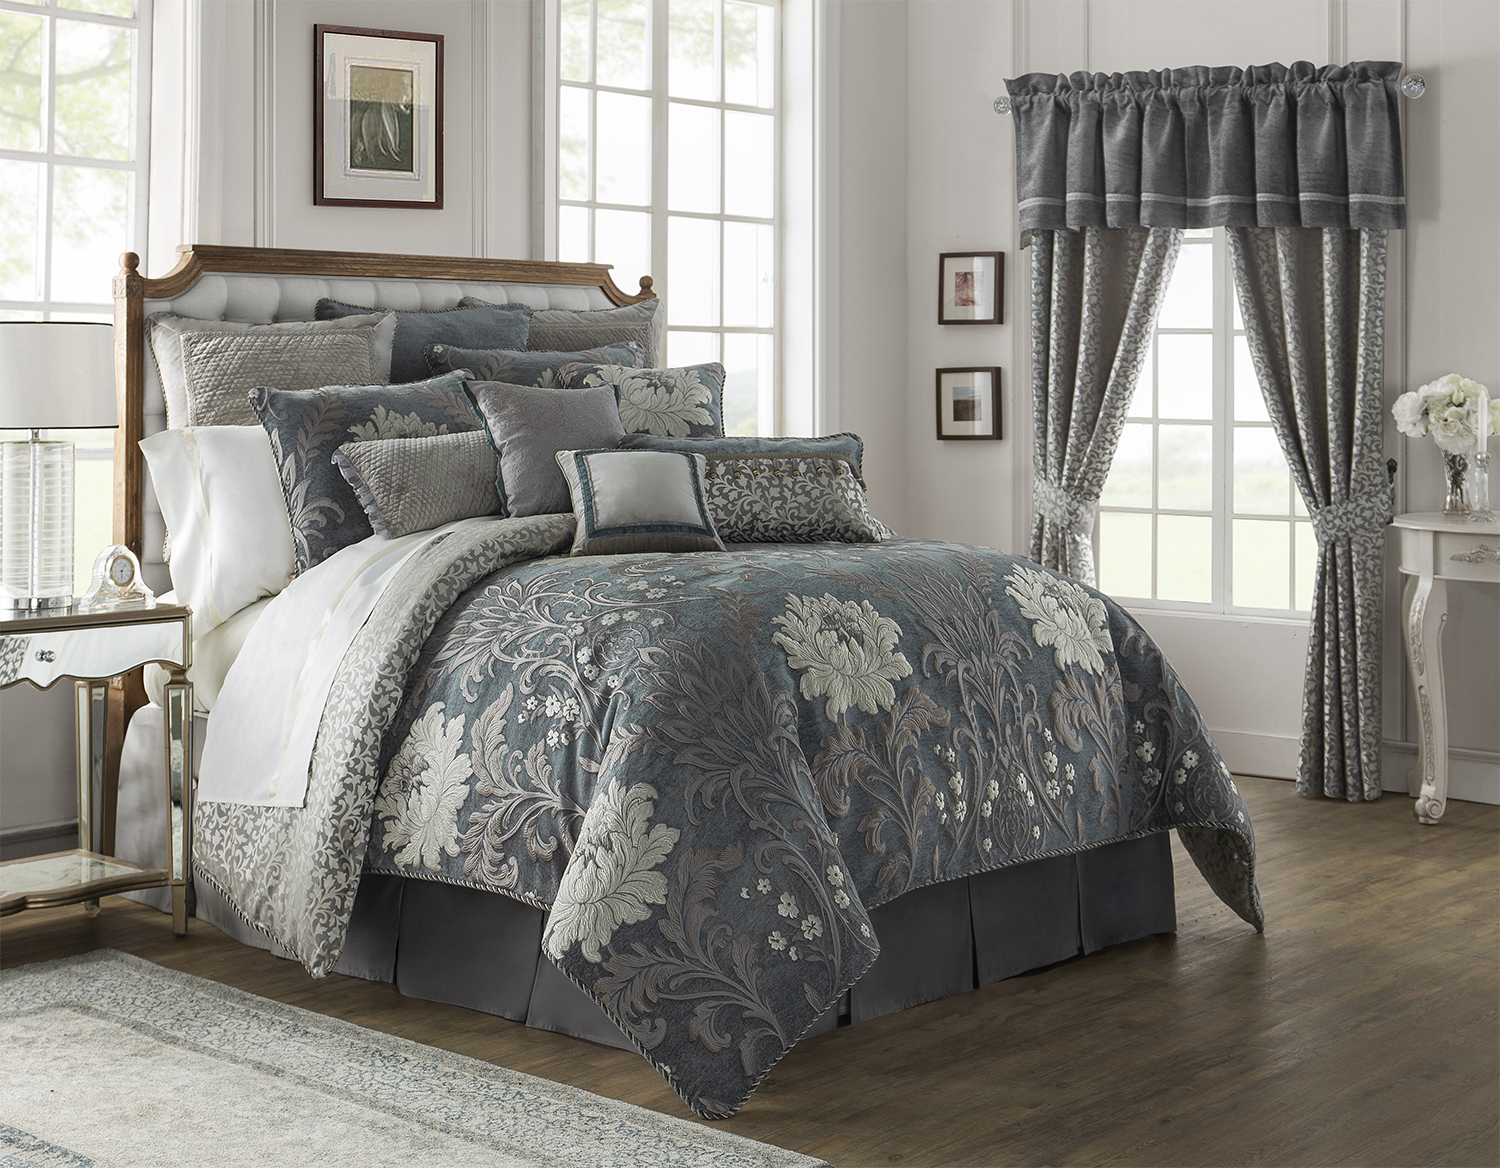 bedding ansonia luxury waterford pewter beddingsuperstore category